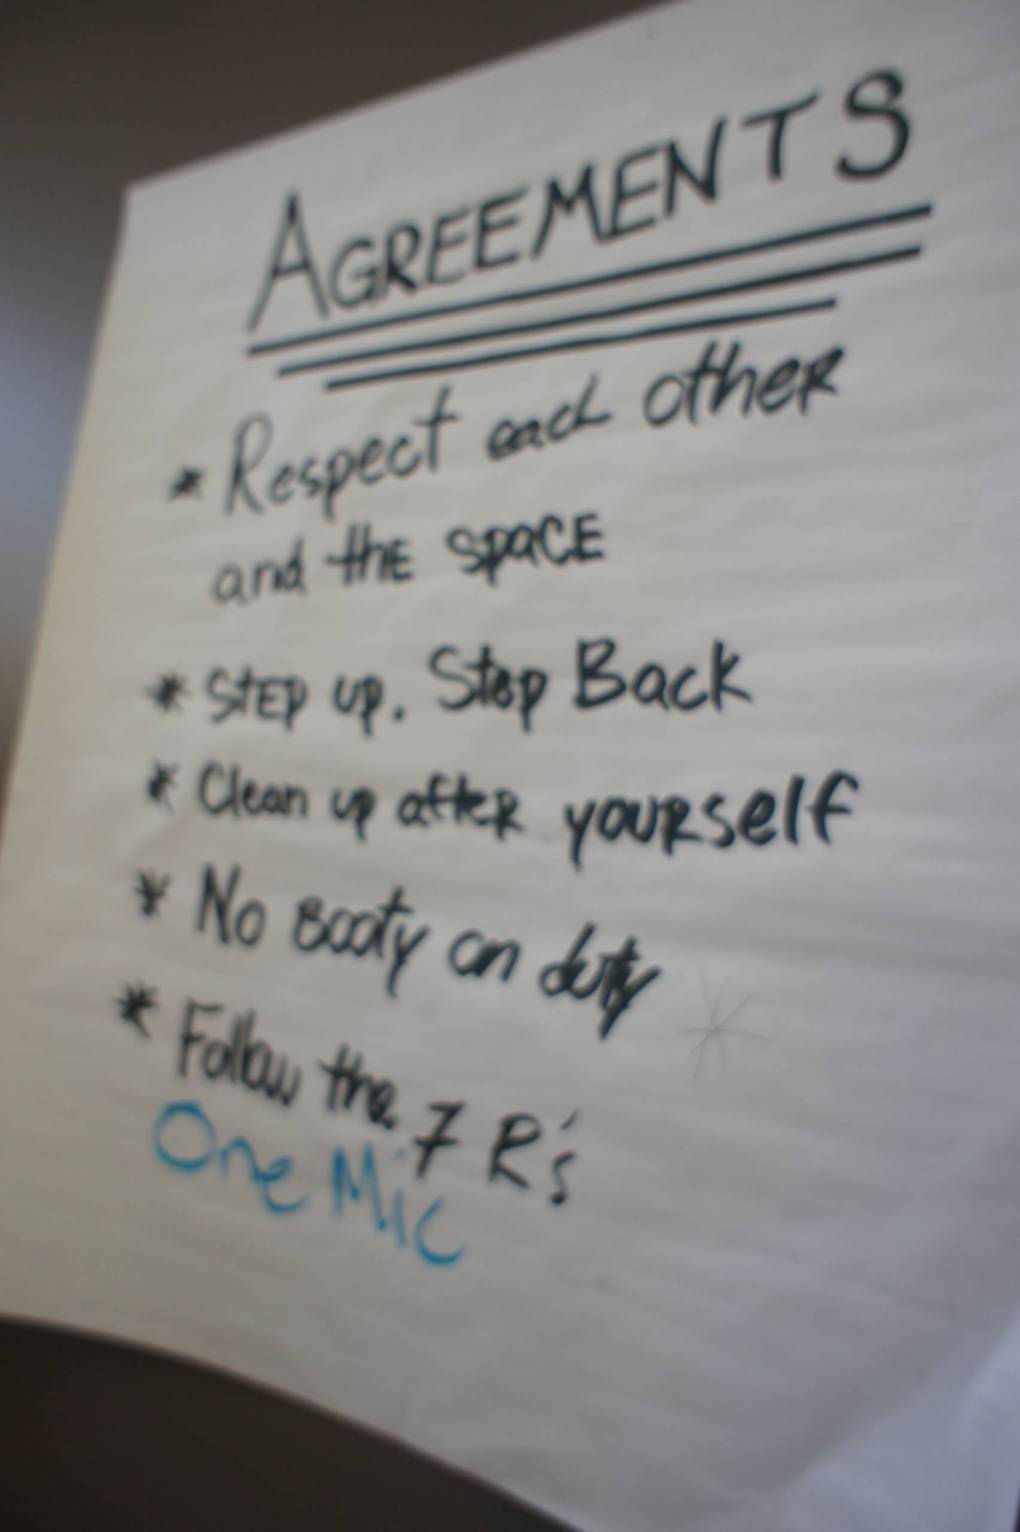 Agreements set by students in the after school space, including "no booty on duty."